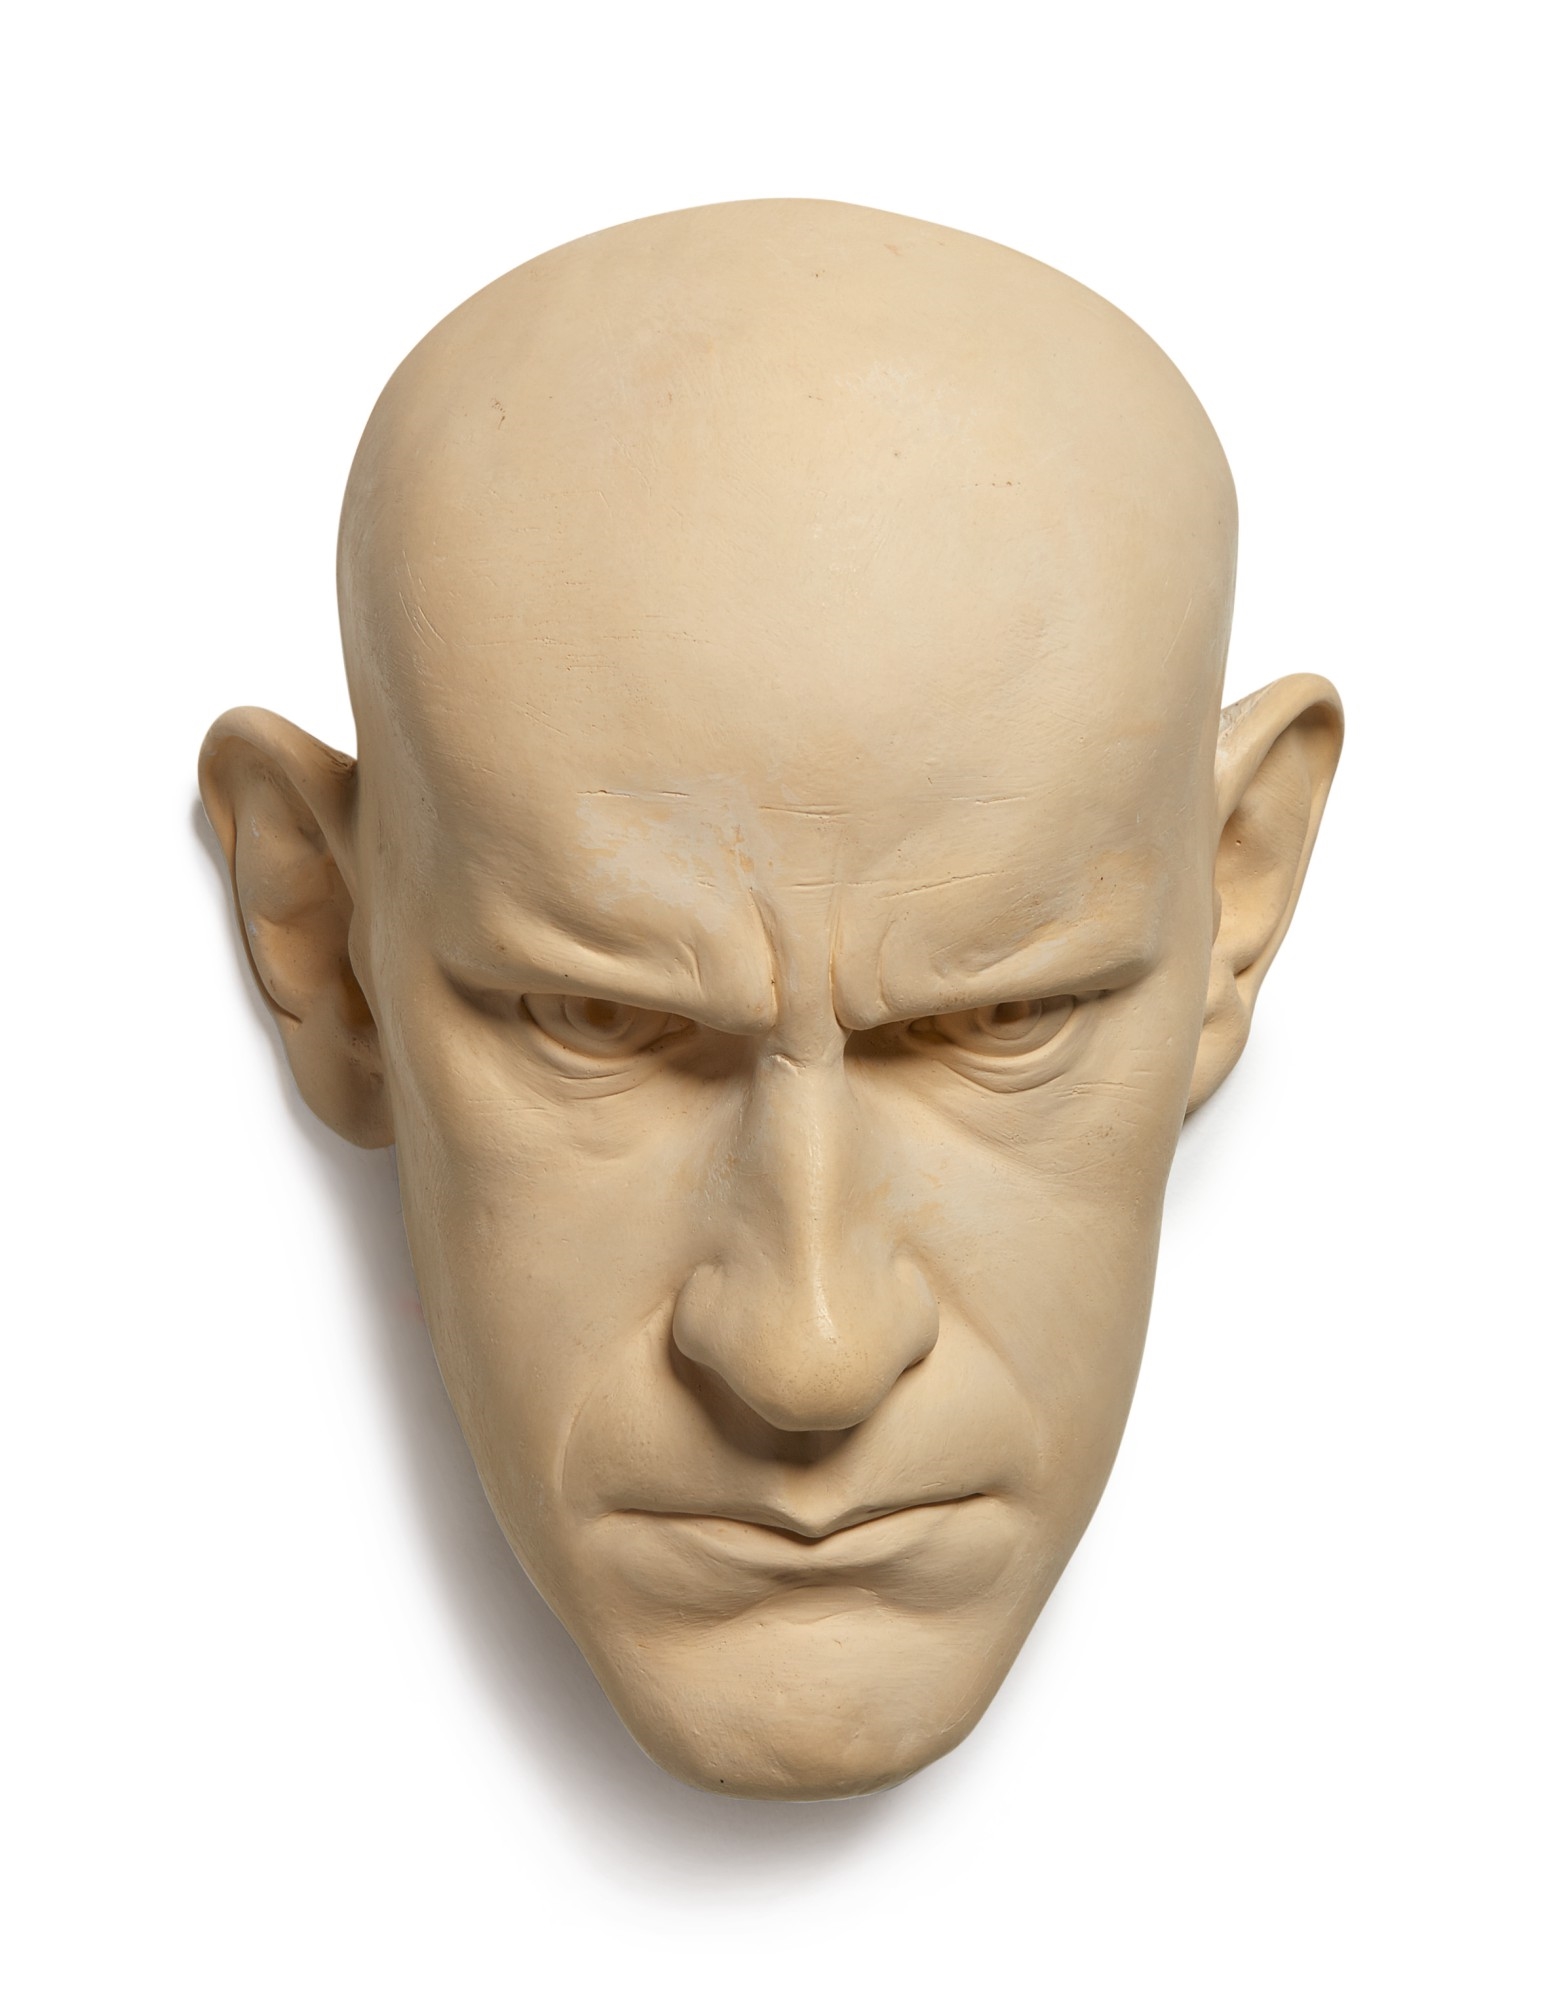 UNTITLED (HEAD OF A MAN) by Ron Mueck, Executed in 2001